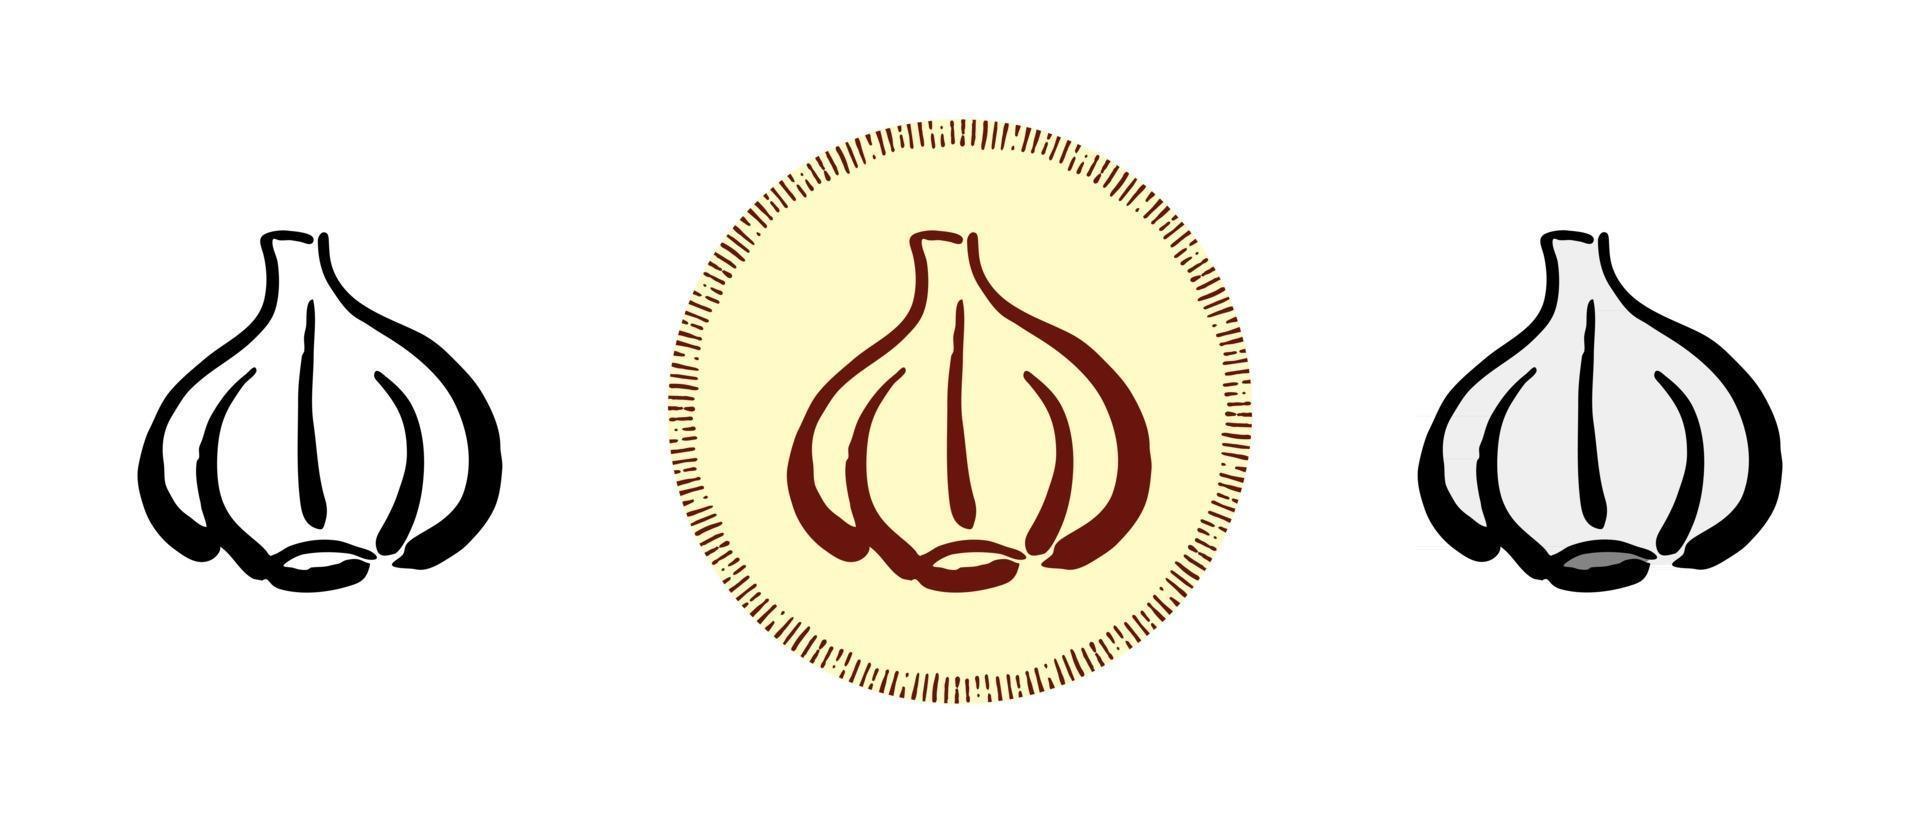 Outline and color and retro symbols of garlic vector